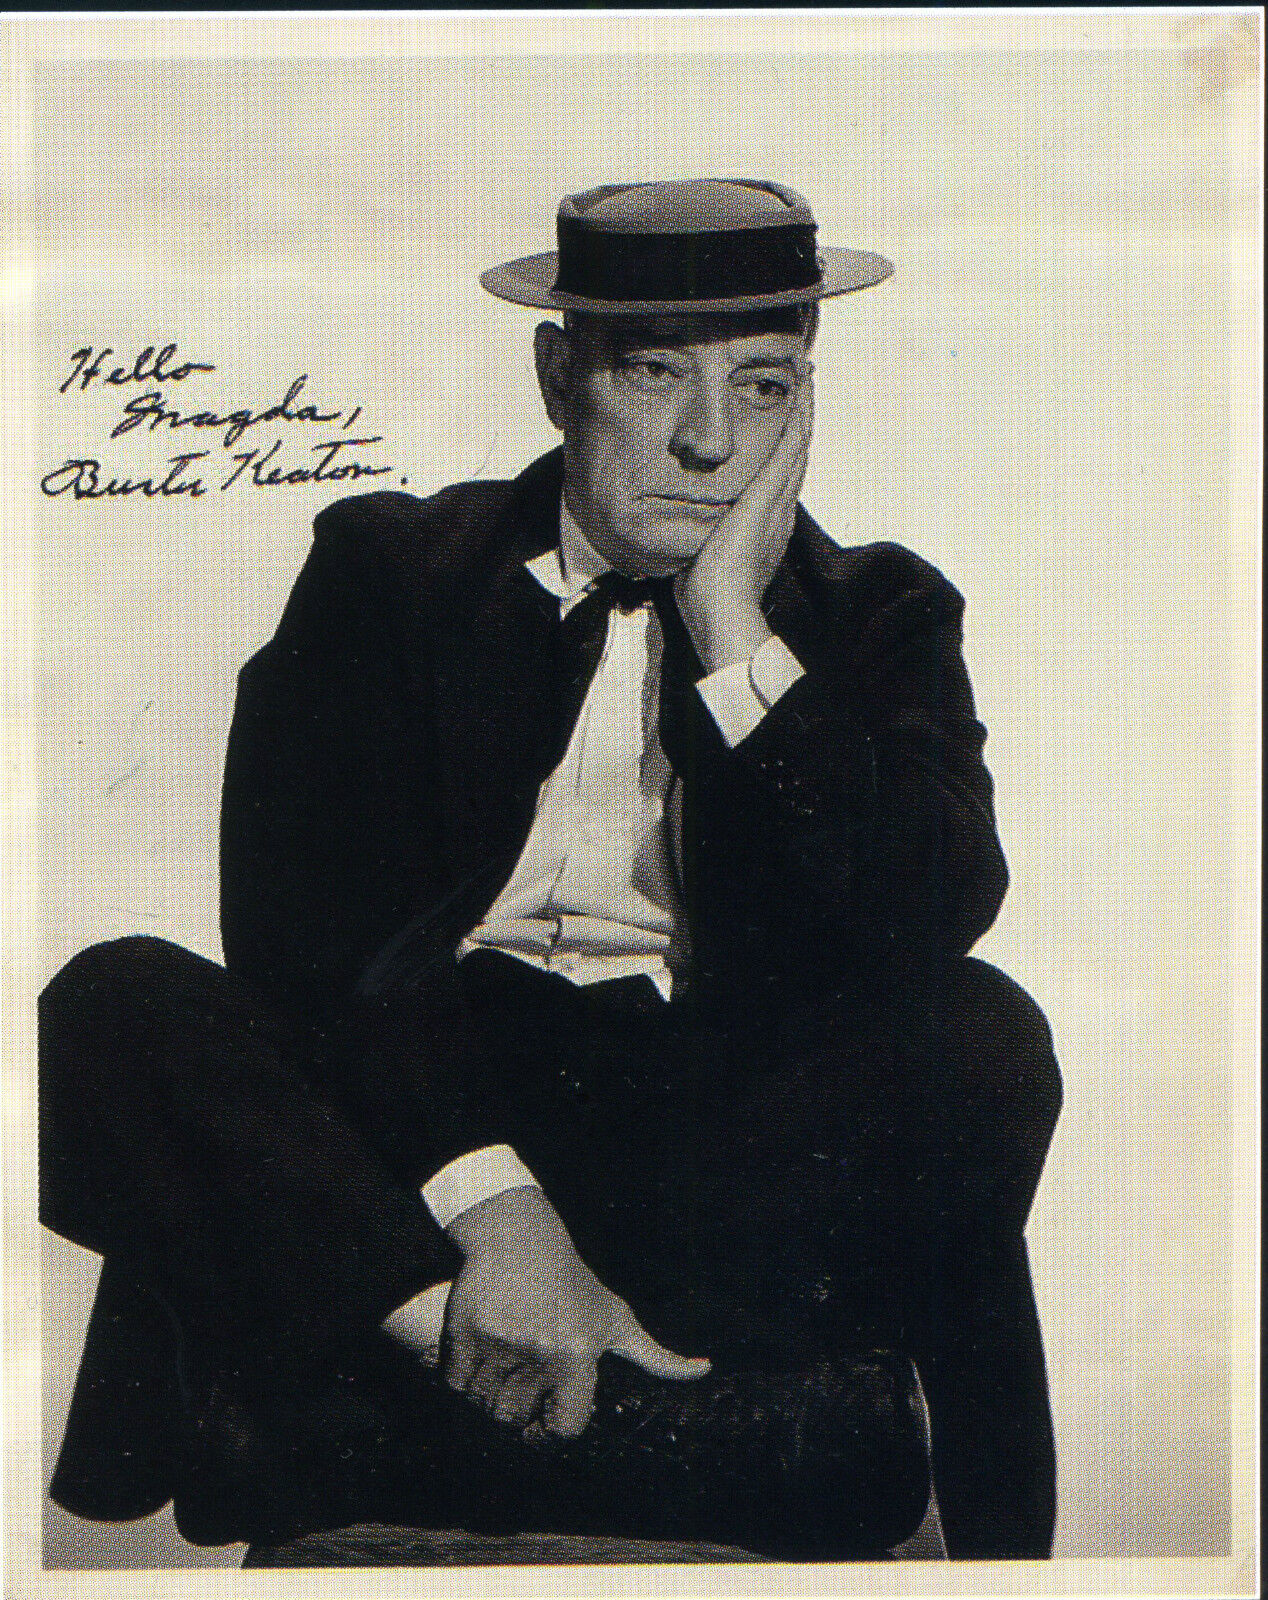 BUSTER KEATON Autographed Photo Poster paintinggraph - Silent Comedy Film Actor - preprint